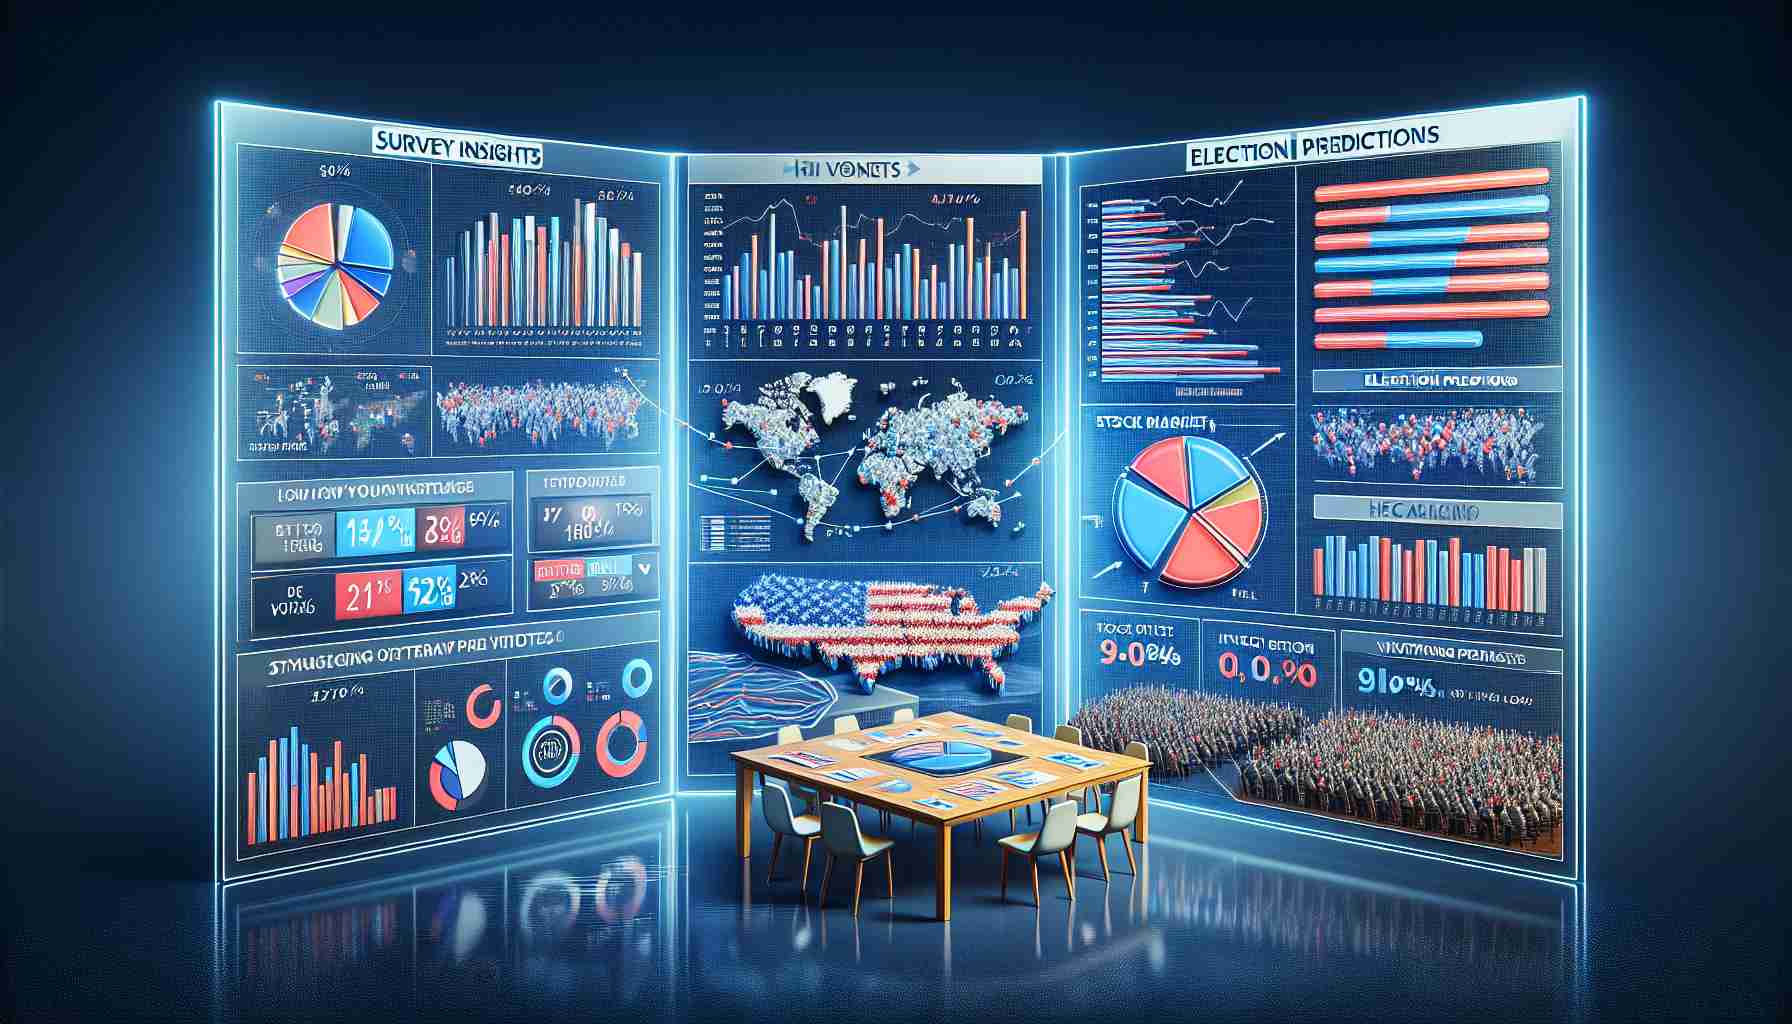 Generate an HD illustration displaying a survey insights board filled with various data visualizations, bar graphs, pie charts representing stock market trends. On another part of the board, present election prediction statistics, including pie charts and bar graphs, showcasing different voting patterns. The entire scene should be realistic and detailed, capturing every aspect of the research.